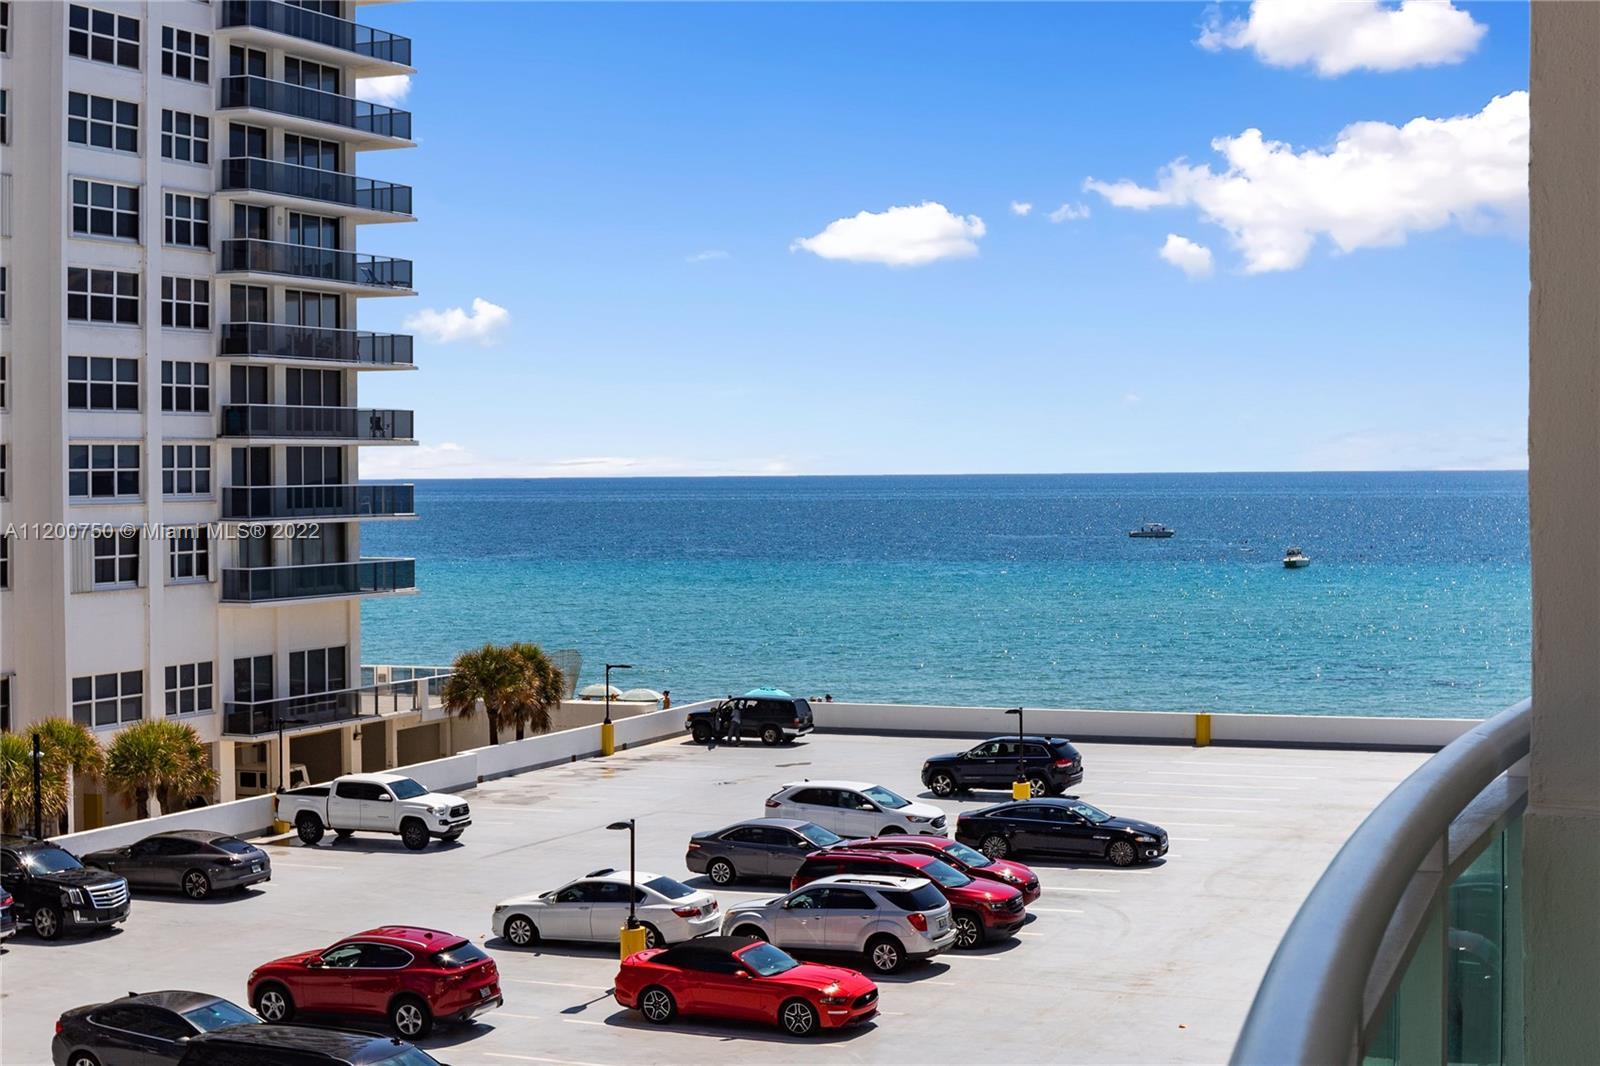 OCEAN VIEW from your balcony! 1Bed/1Bath just FEW STEPS FROM THE BEACH! Amenities: Private beach acc